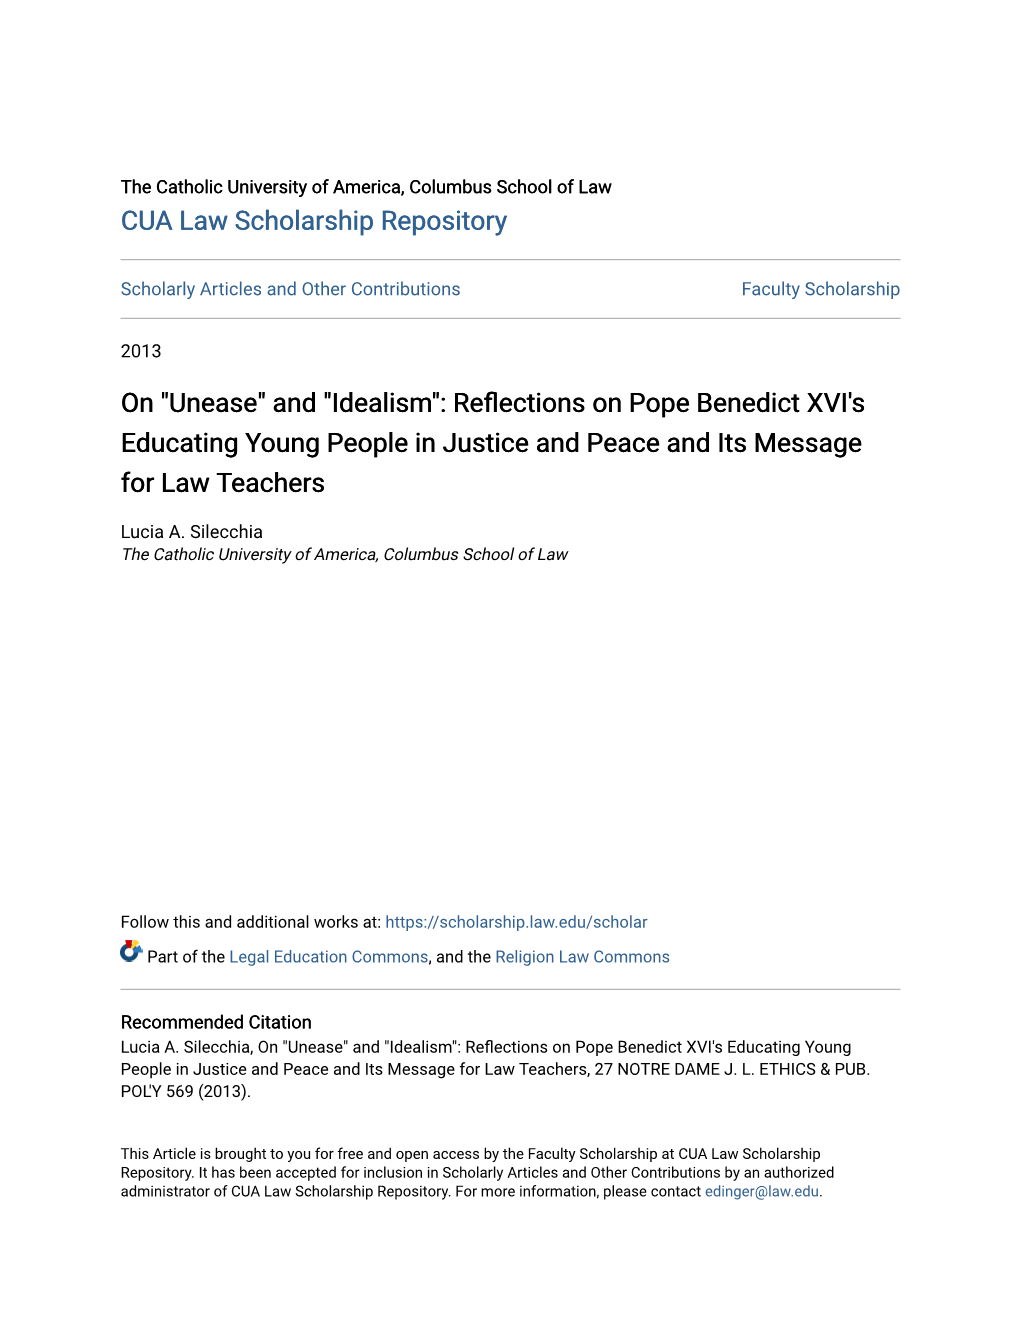 REFLECTIONS on POPE BENEDICT XVI's EDUCATING YOUNG PEOPLE in JUSTICE and PEACE and ITS MESSAGE for LAW TEACHERS